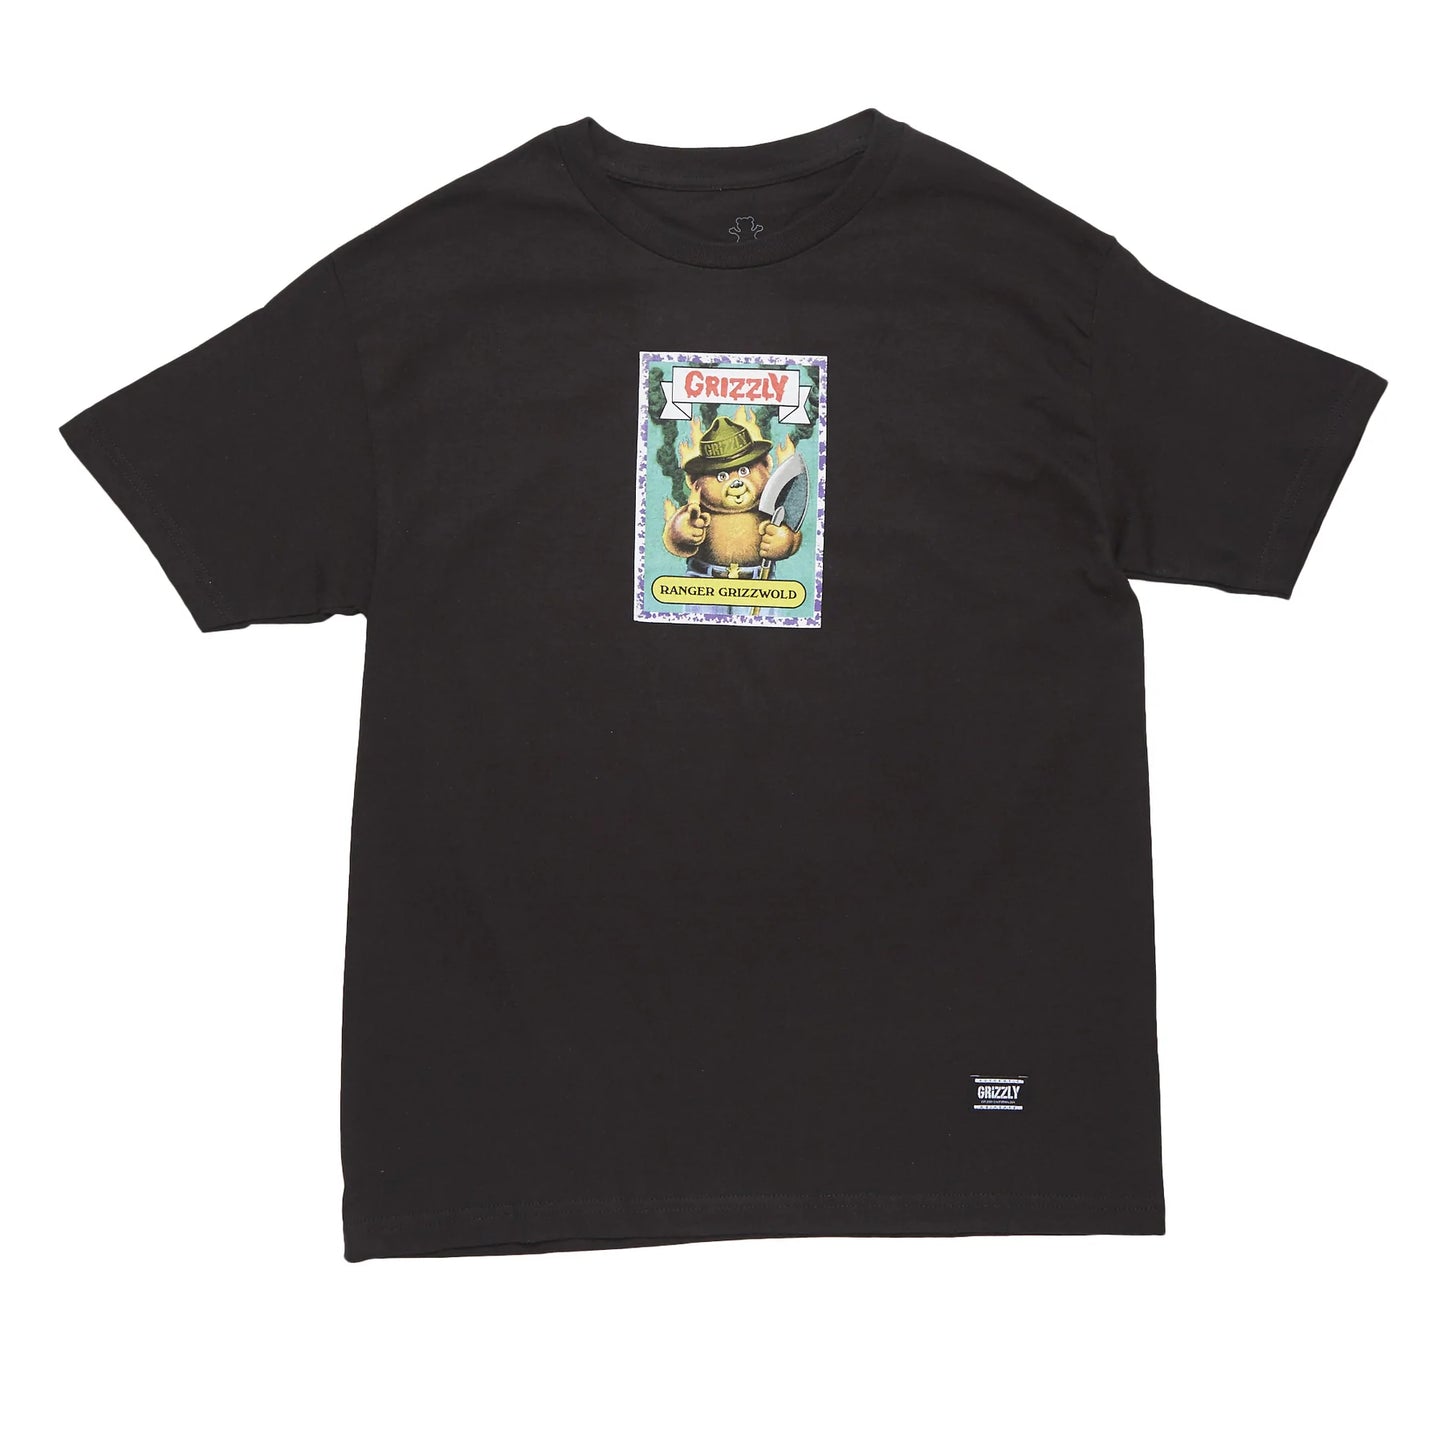 Grizzly - Ranger Grizzwold Tshirt